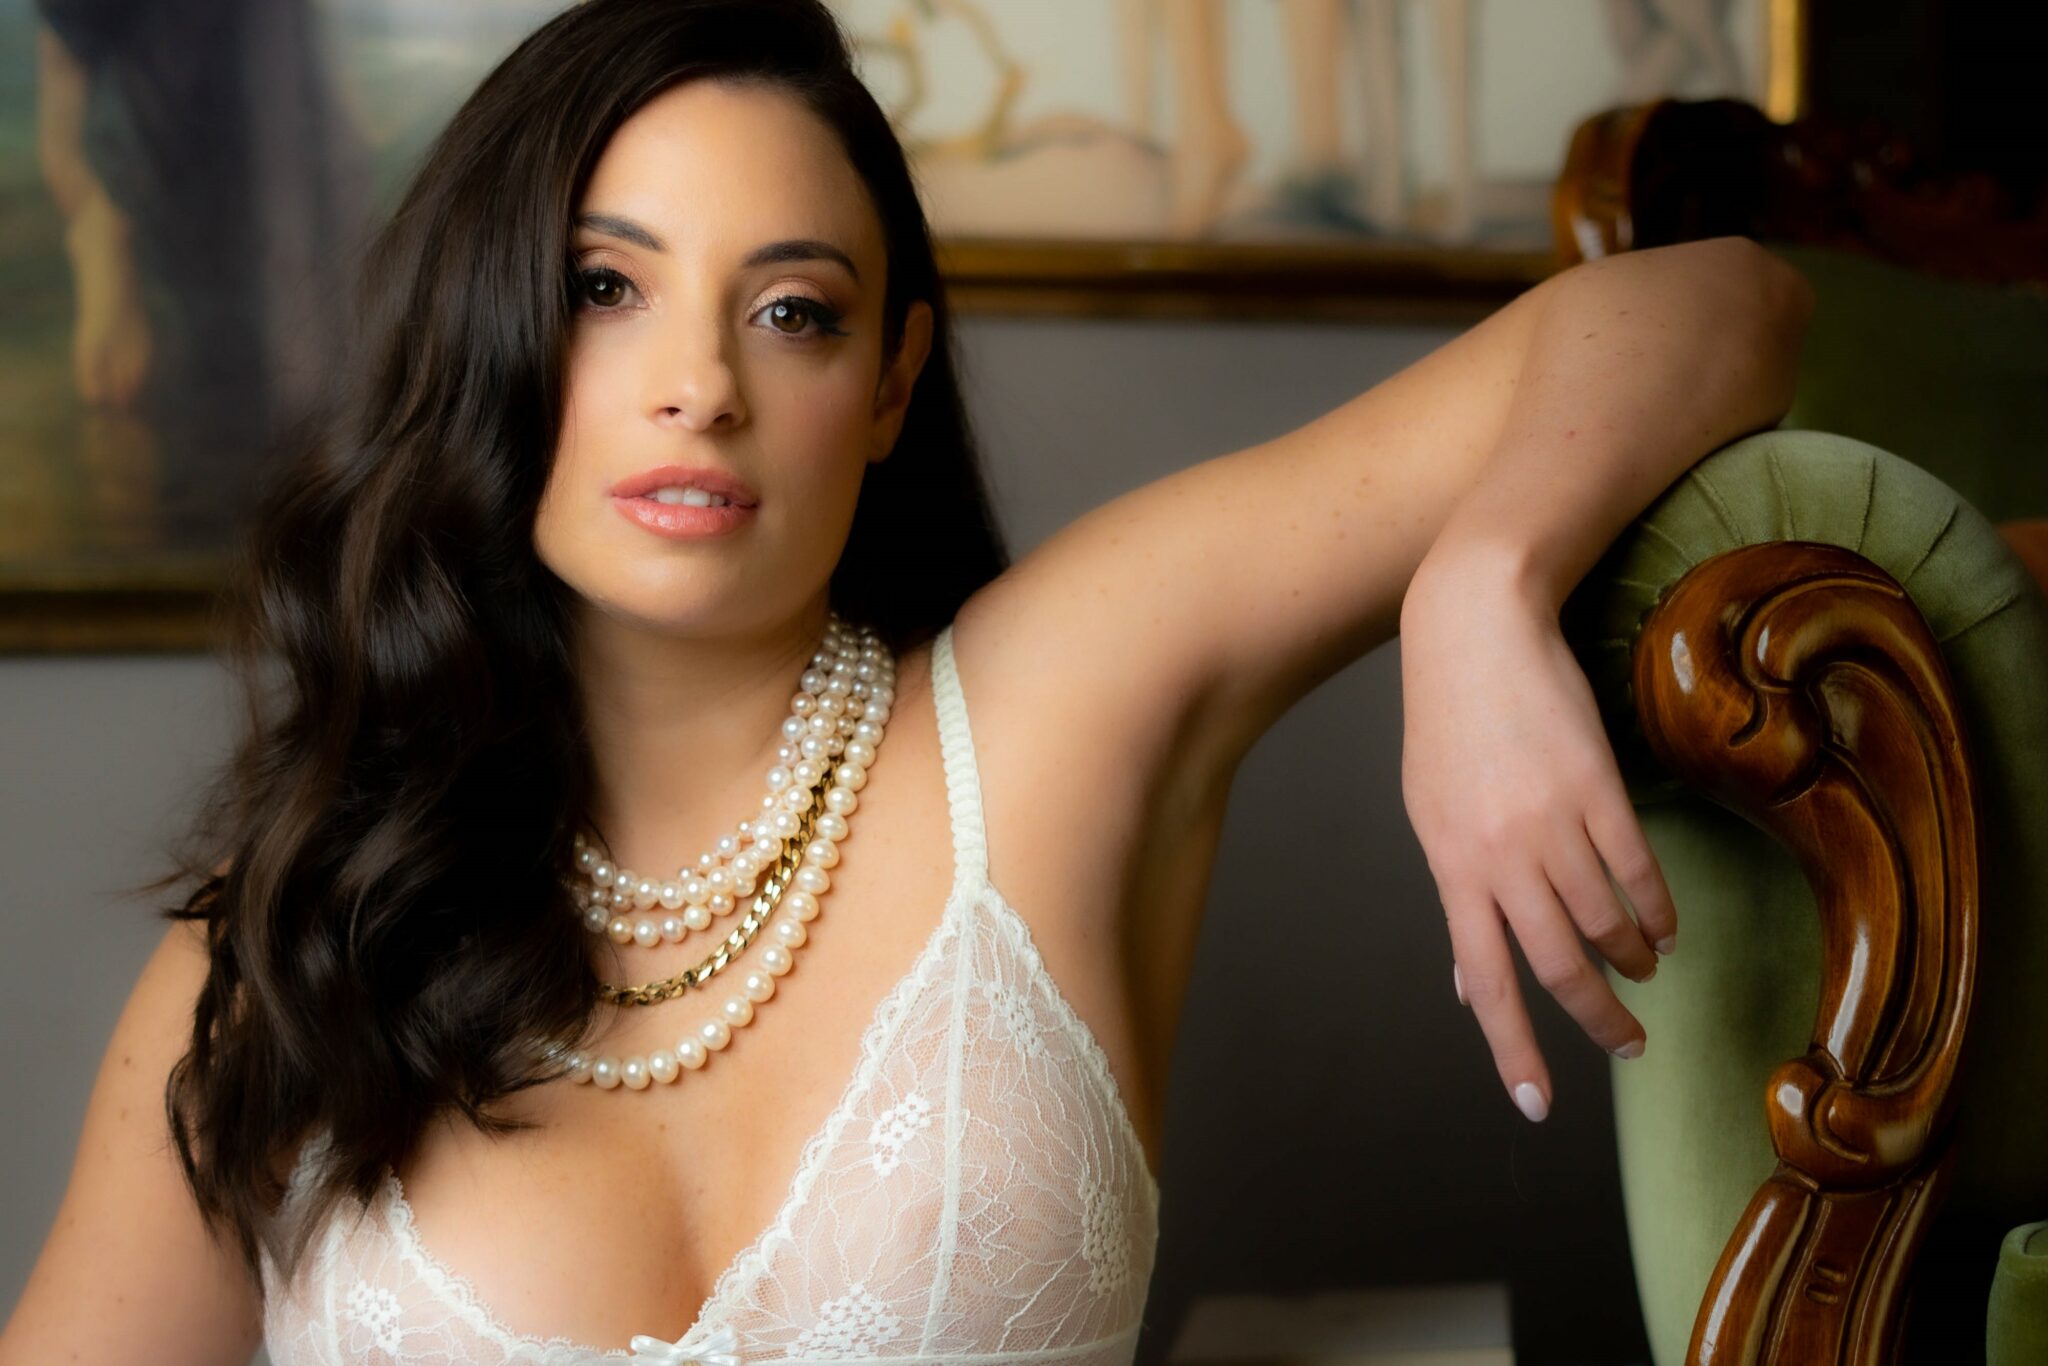 Erotica author Jade May posing on an antique chaise longue with her arm propped up. She's wearing a white, lacy bra top and a number of pearl necklaces.